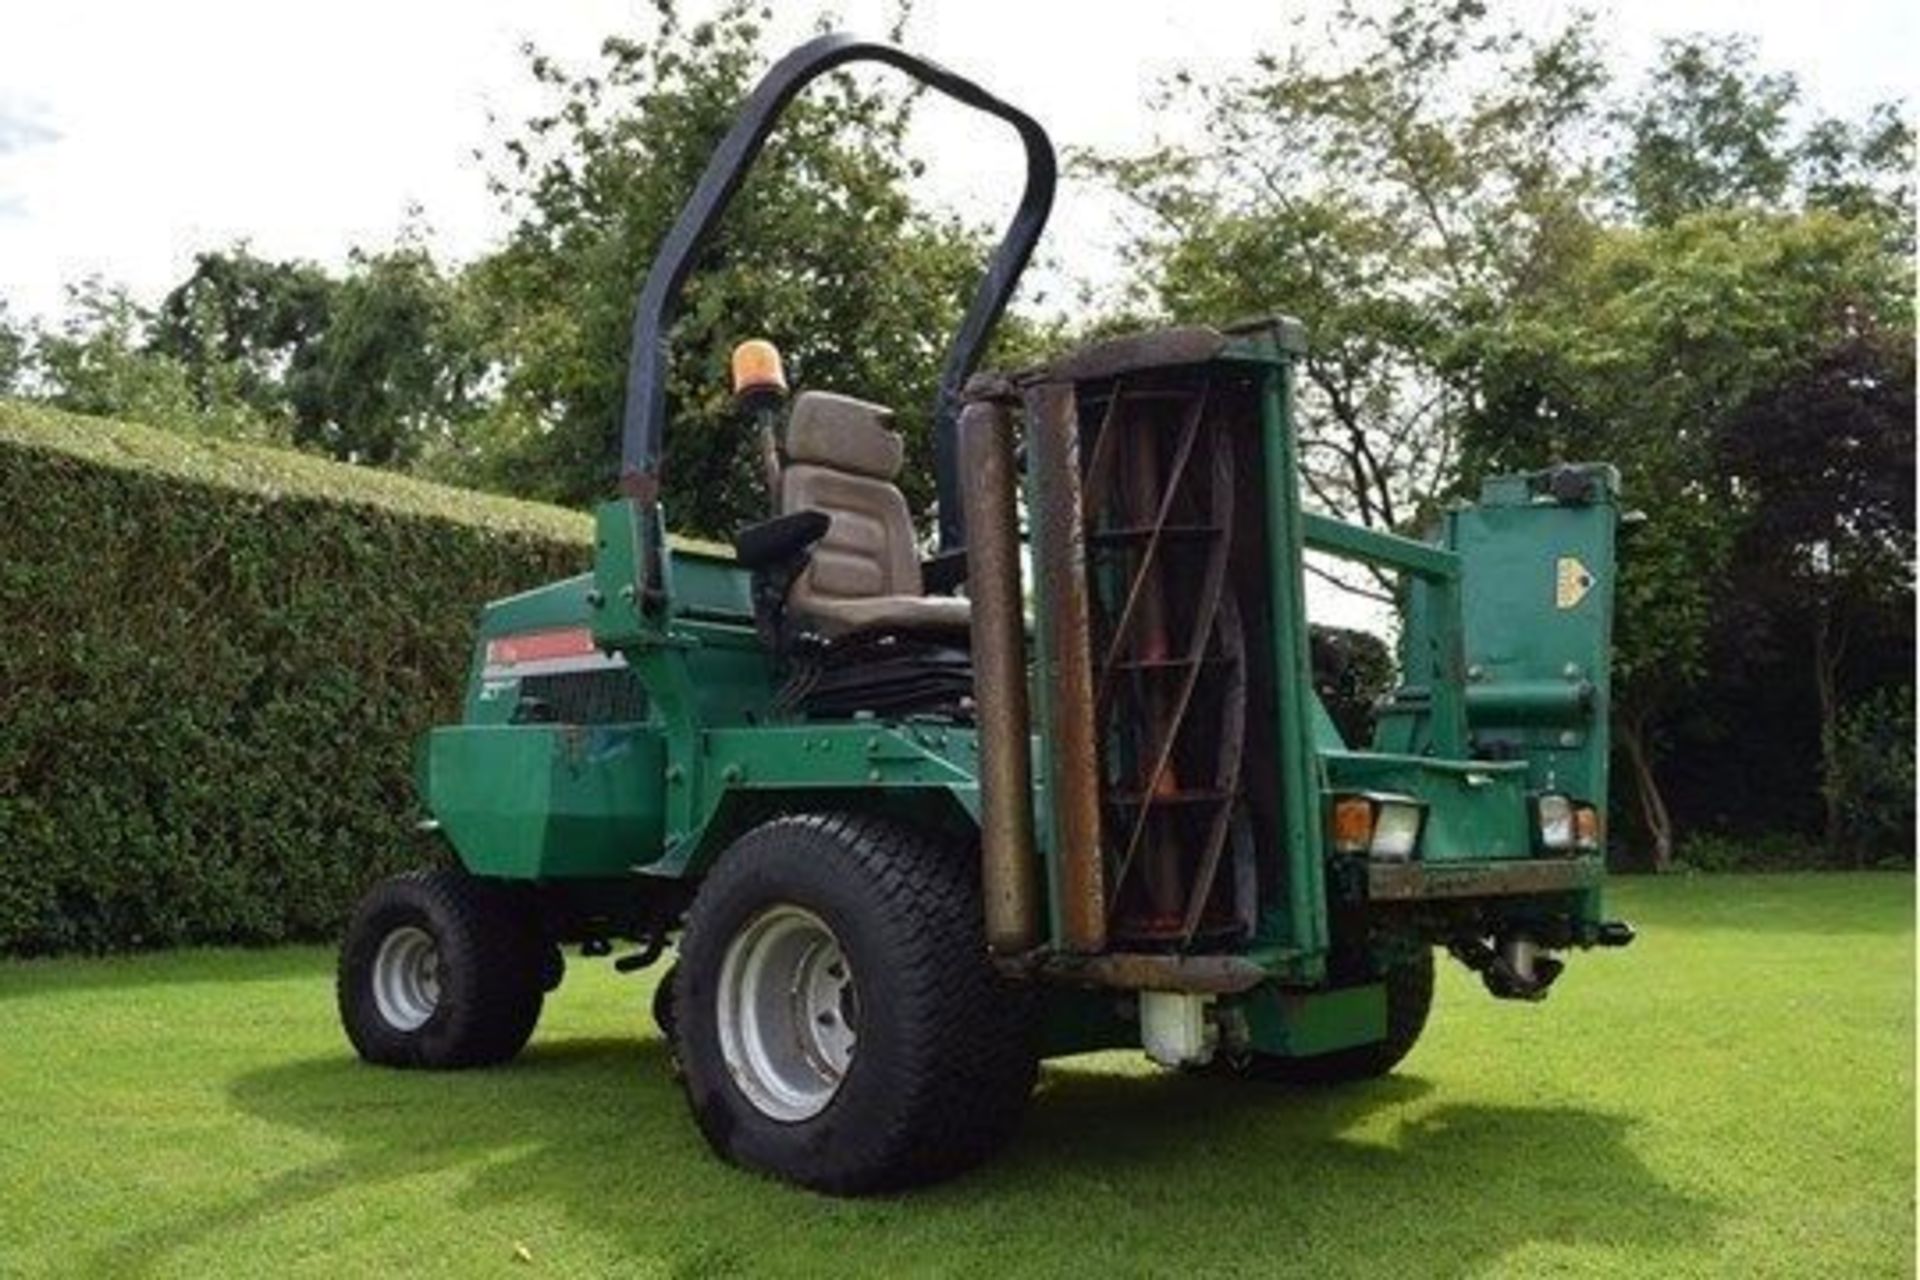 2003 Ransomes Parkway 2250 Plus Ride On Cylinder Mower - Image 2 of 7